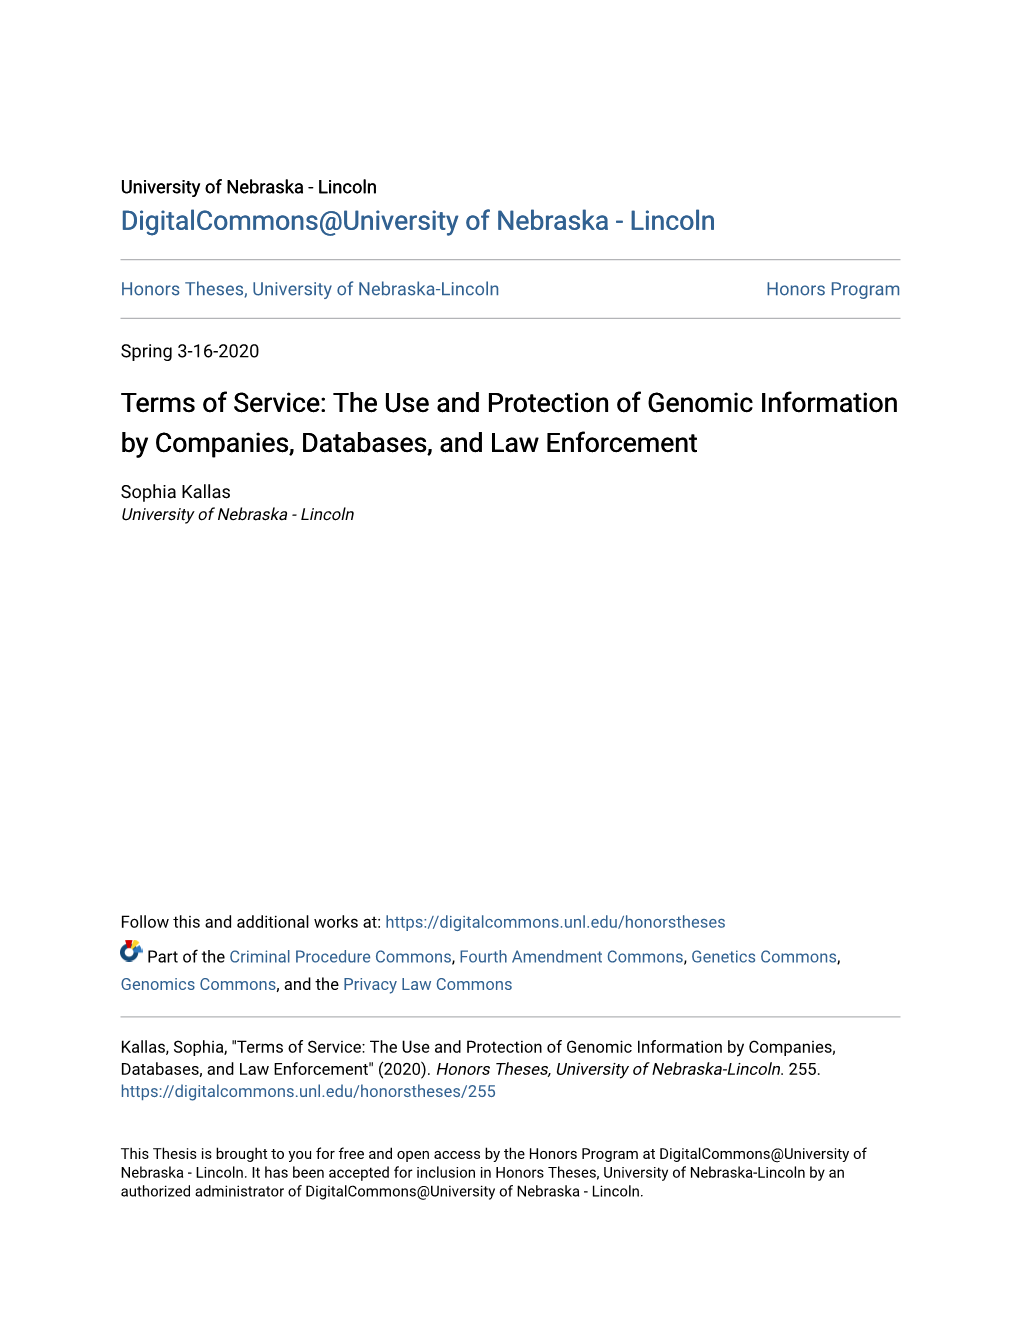 The Use and Protection of Genomic Information by Companies, Databases, and Law Enforcement